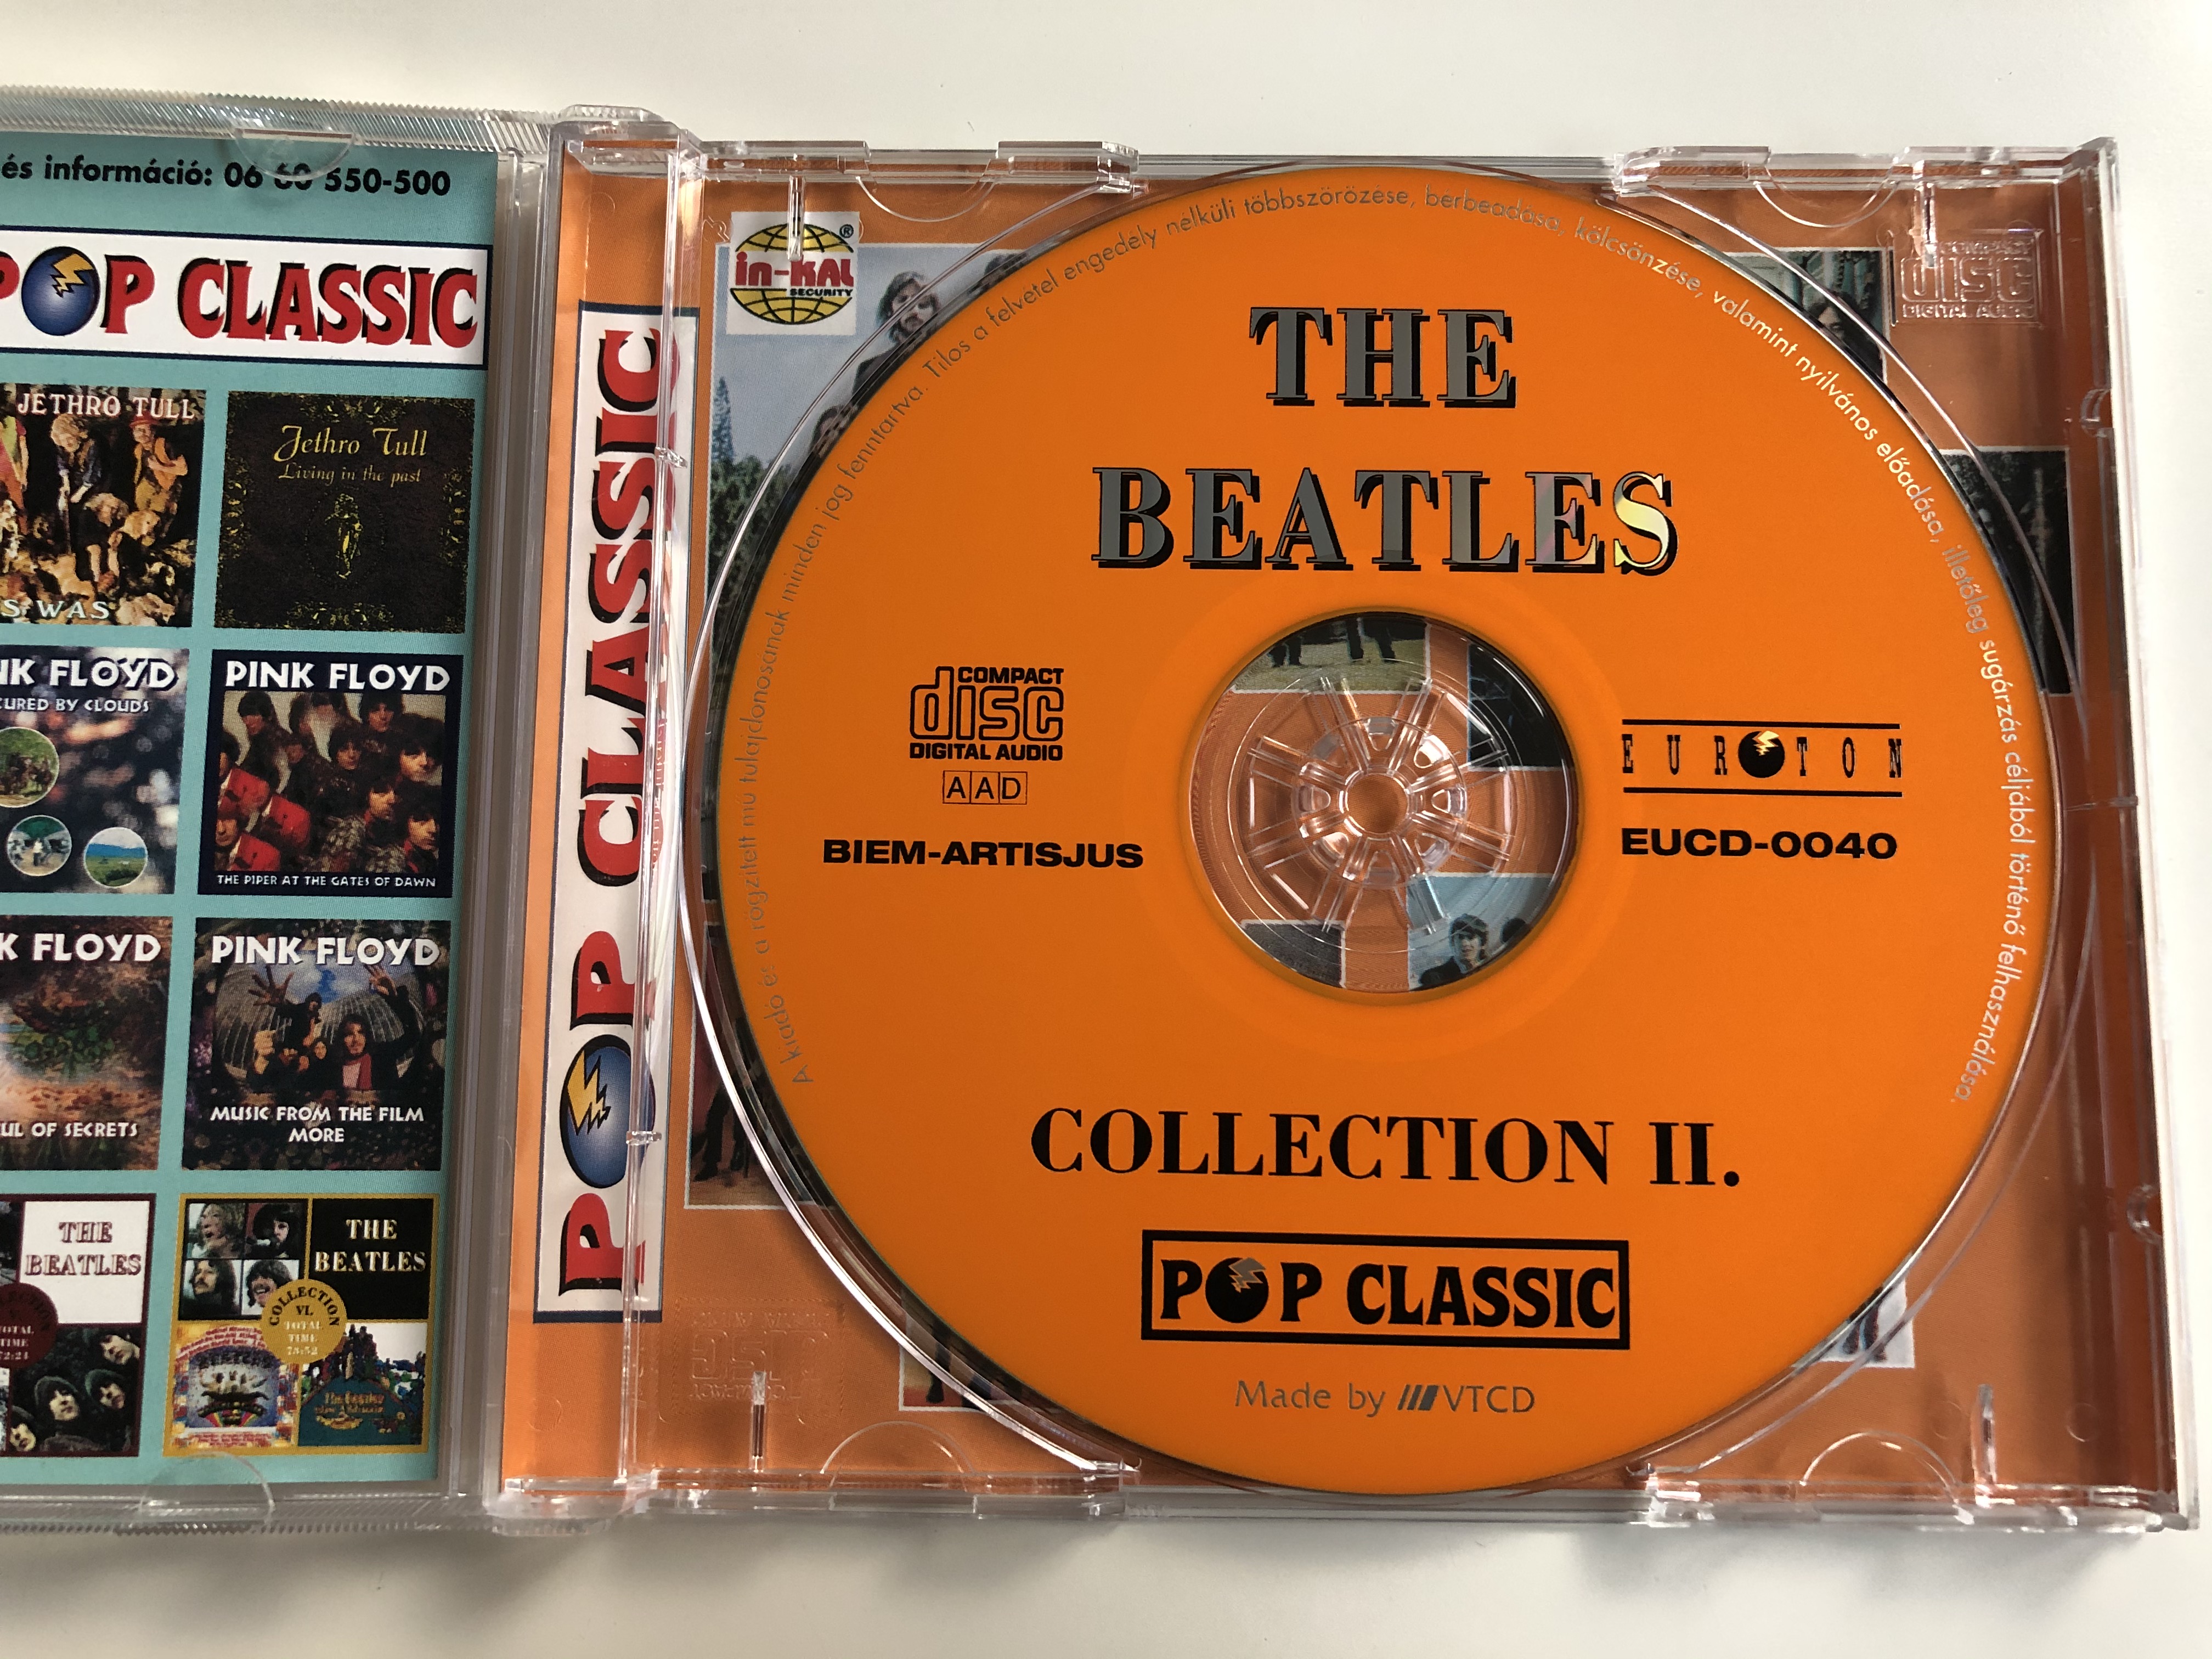 the-beatles-collection-ii.-total-time-7333-pop-classic-euroton-audio-cd-eucd-0040-2-.jpg